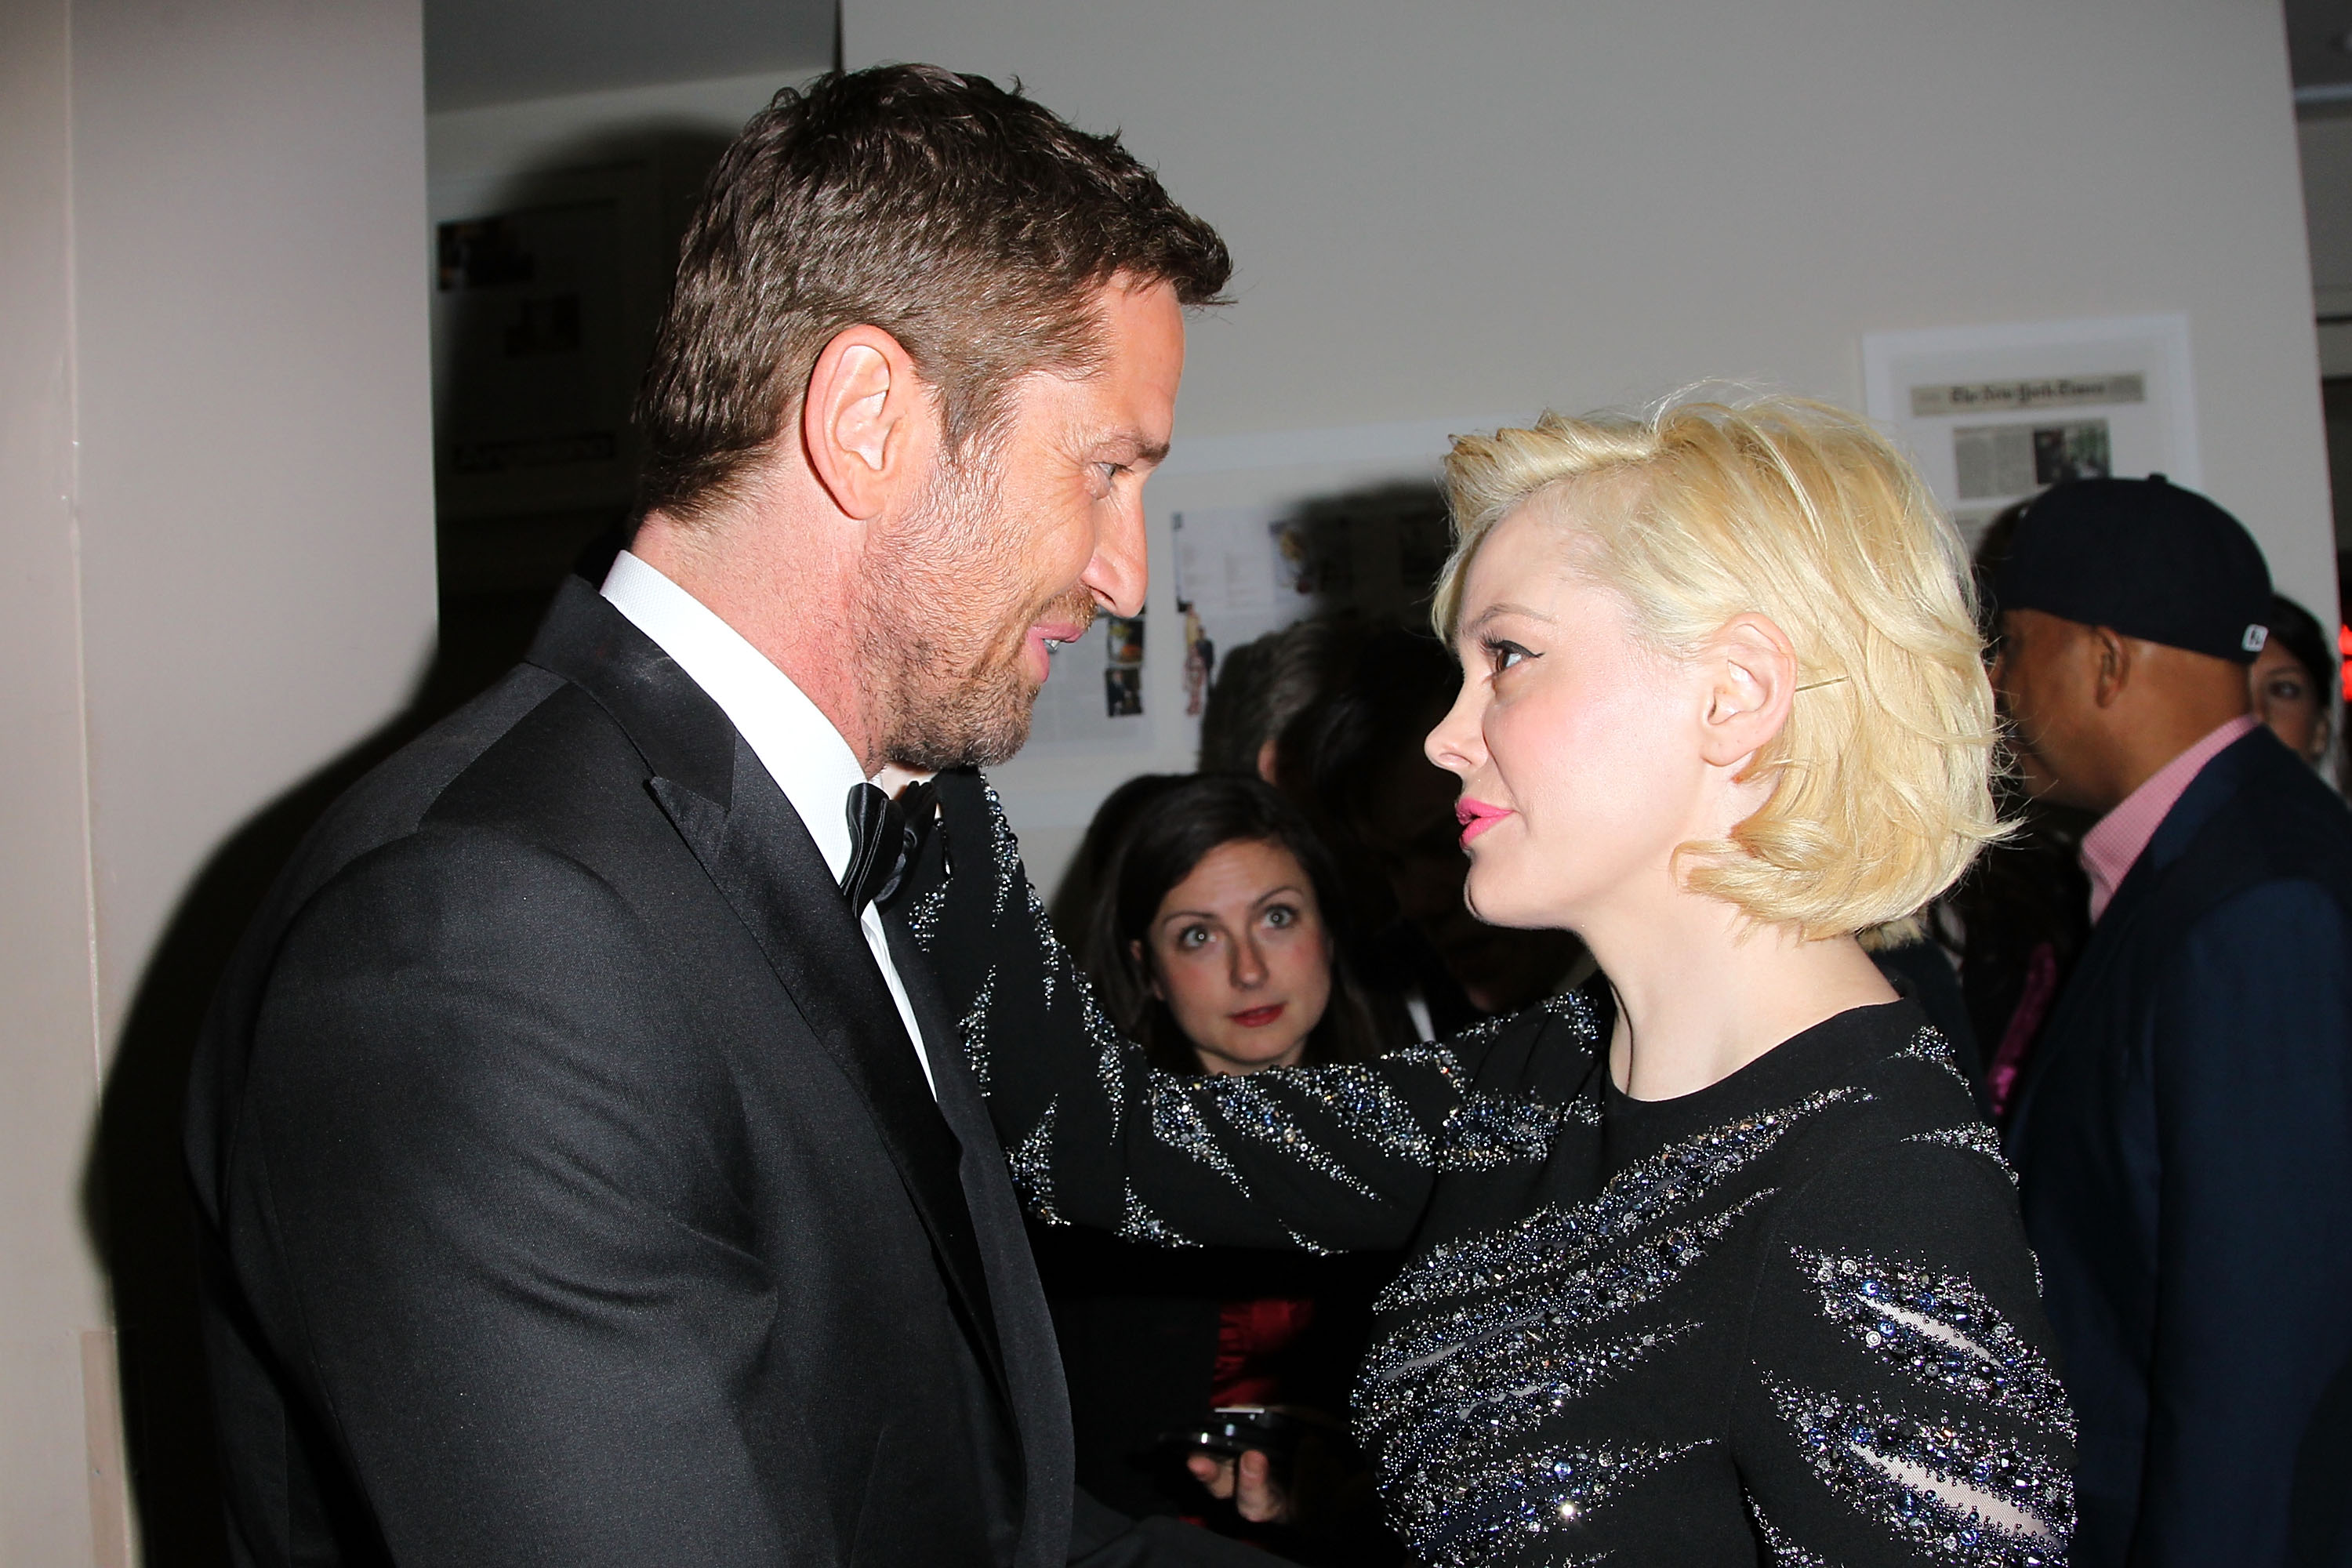 WEST HOLLYWOOD, CA - FEBRUARY 21: (L-R) Gerard Butler and Rose McGowan attend the Hollywood Domino And Bovet 1822 Gala Benefiting Artists For Peace And Justice at Sunset Tower on February 21, 2013 in West Hollywood, California.  (Photo by Jonathan Leibson/WireImage)